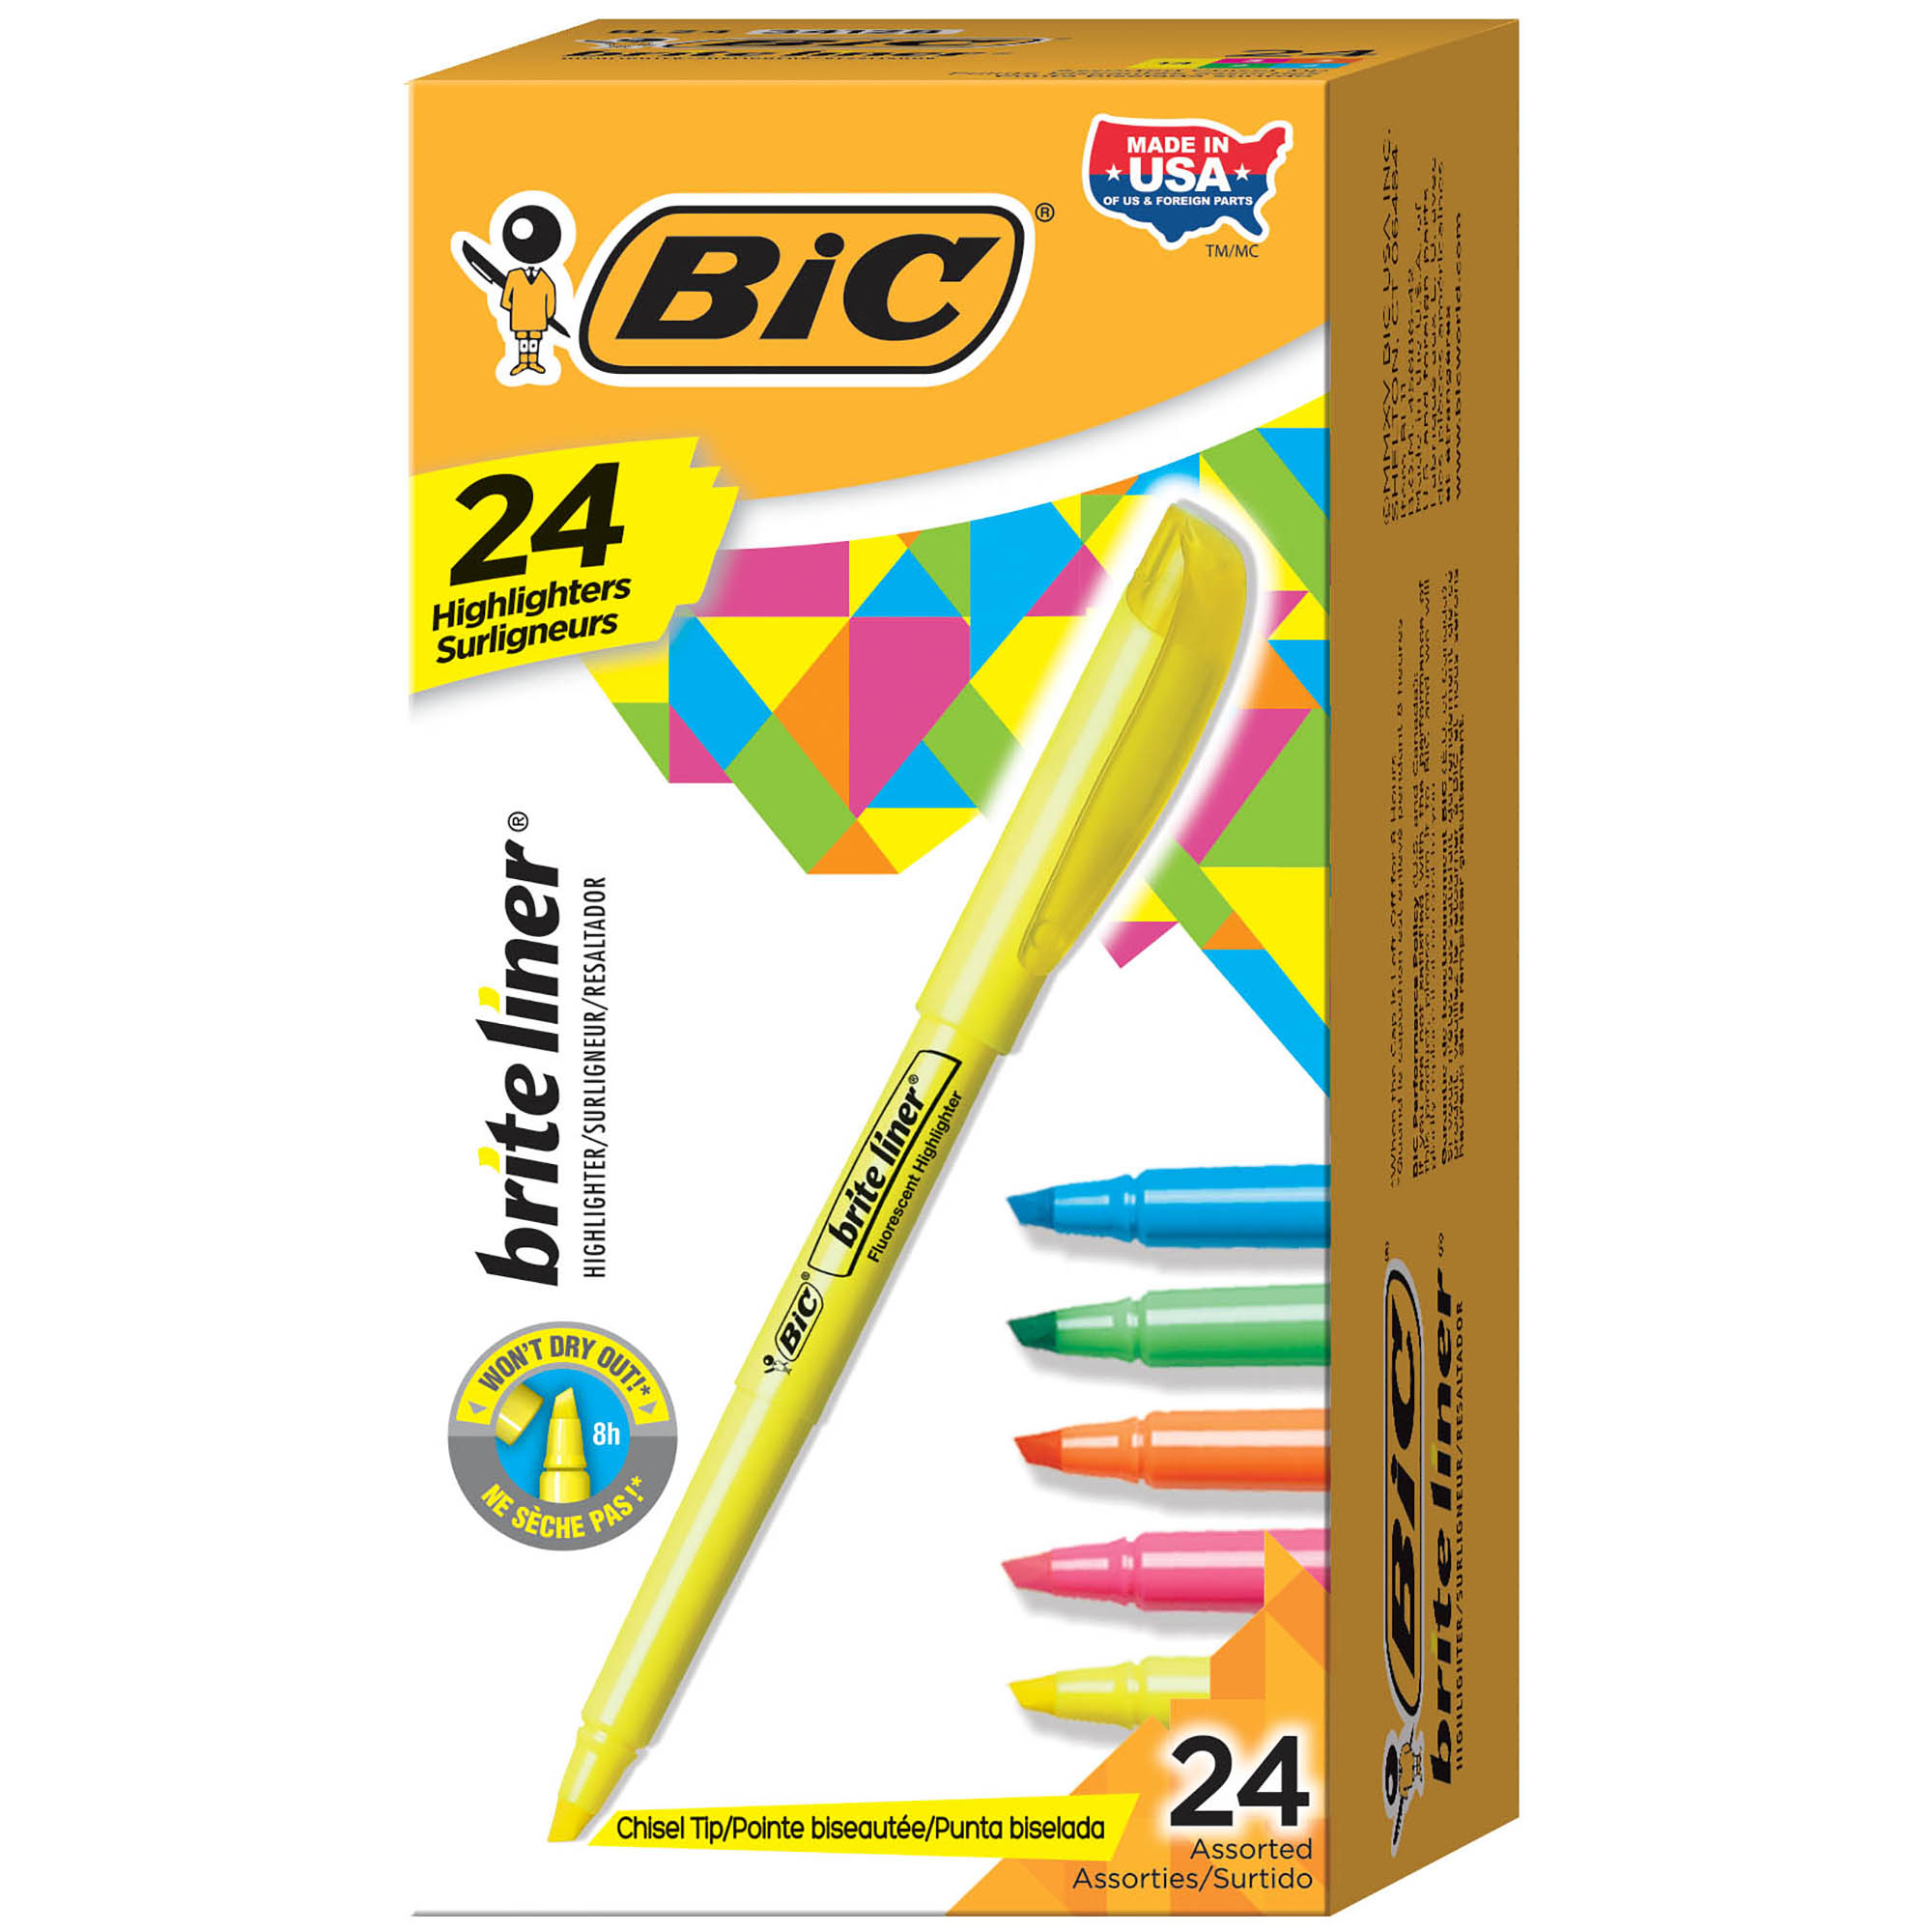 https://media.officedepot.com/image/upload/v1666030709/content/AEM%20Images%20%28WWW%2CODP%29/Office%20Supplies/Pens%2C%20Pencils%20and%20Markers/Markers%20and%20Highlighters/Highlighters.jpg